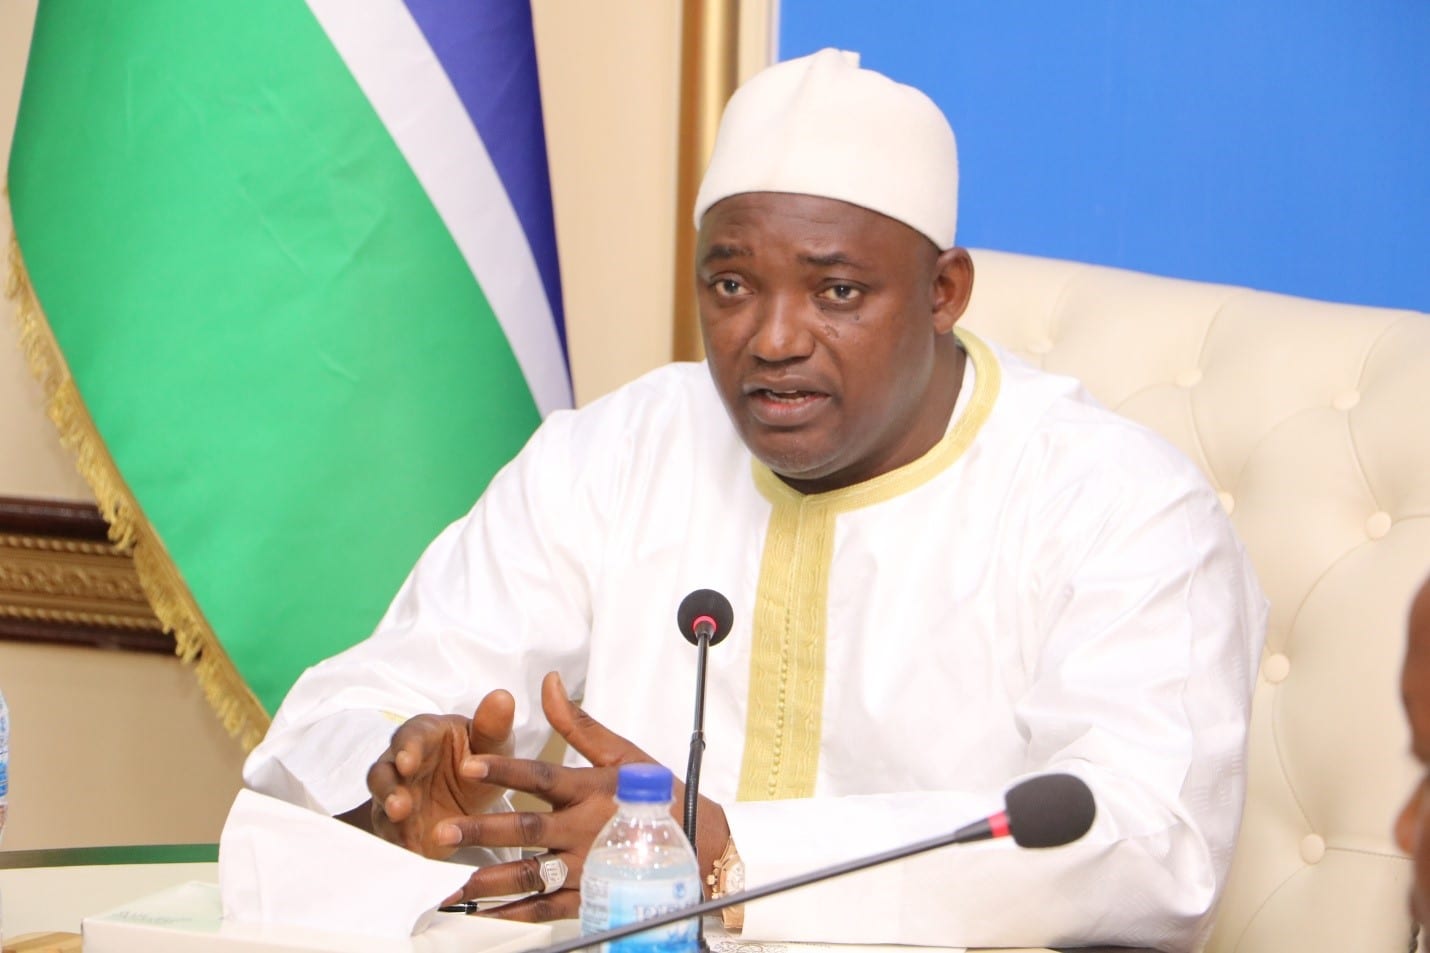 Gambia government ravaged by Covid-19